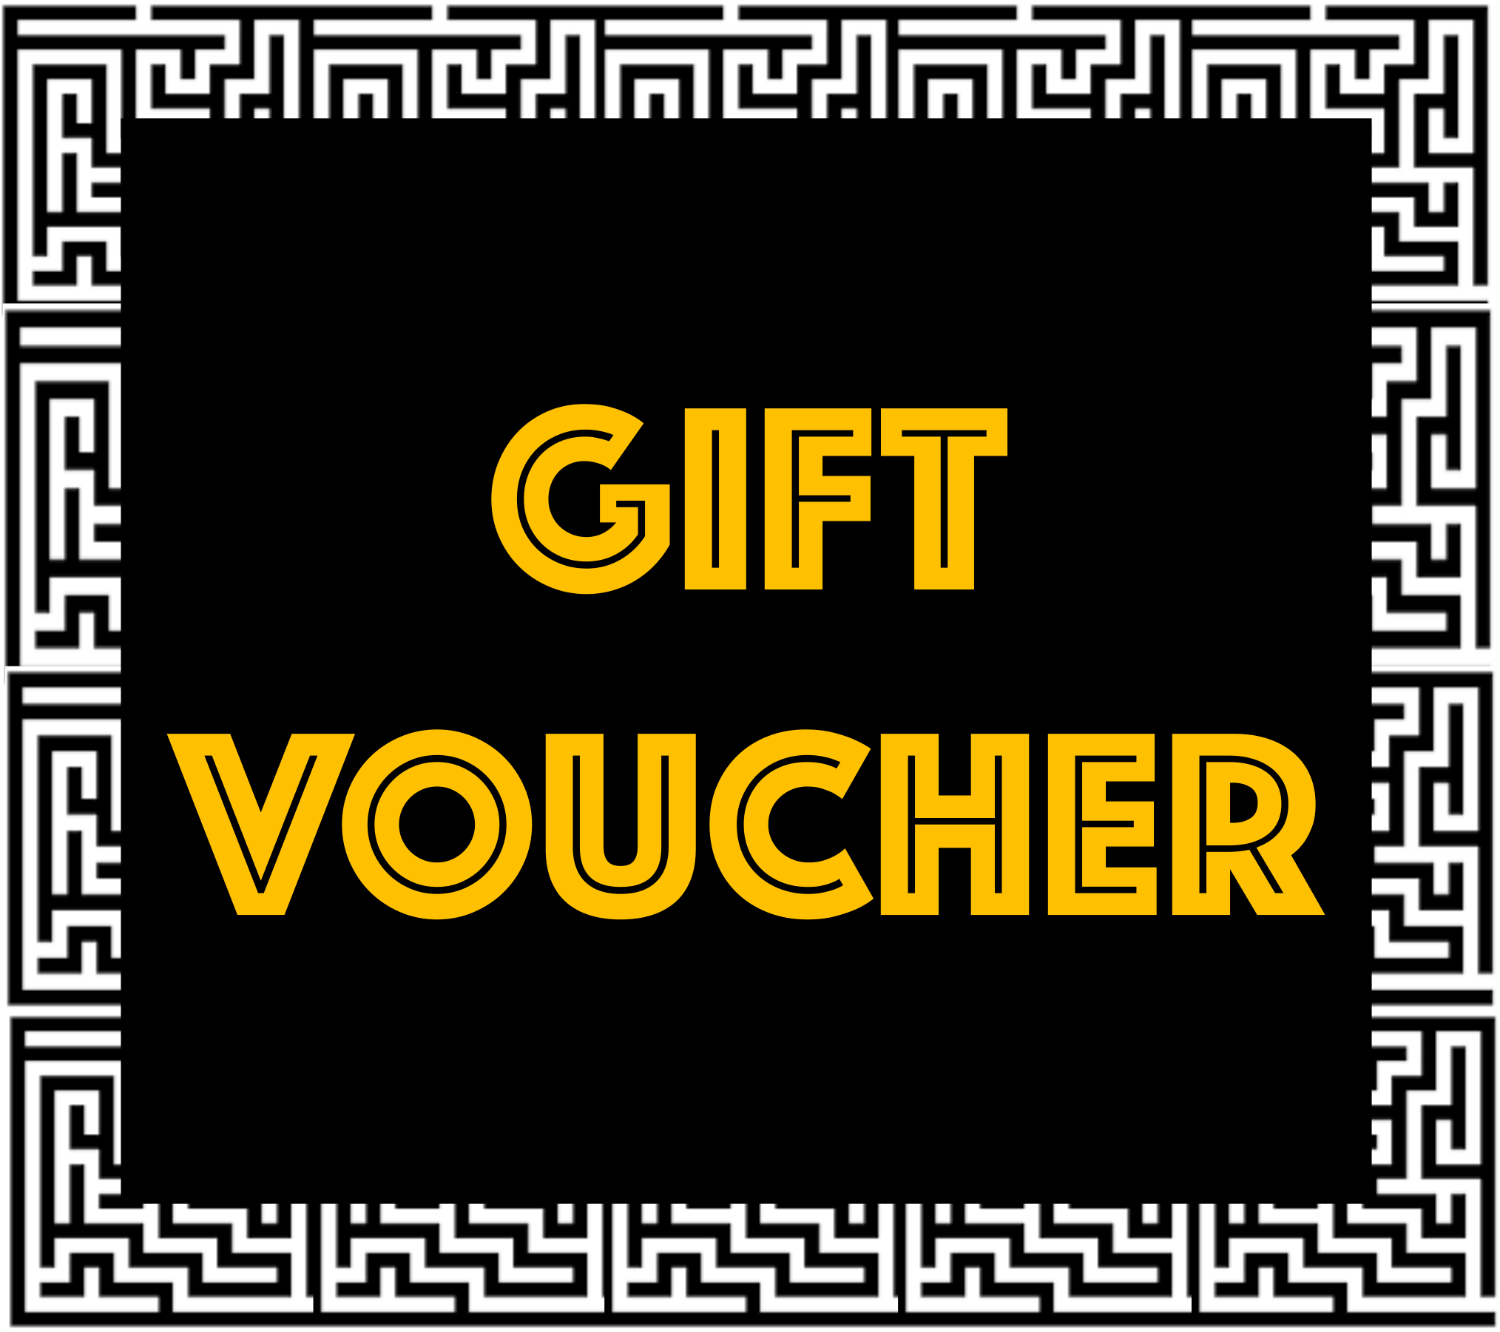 Gift voucher image for Escape From The Room